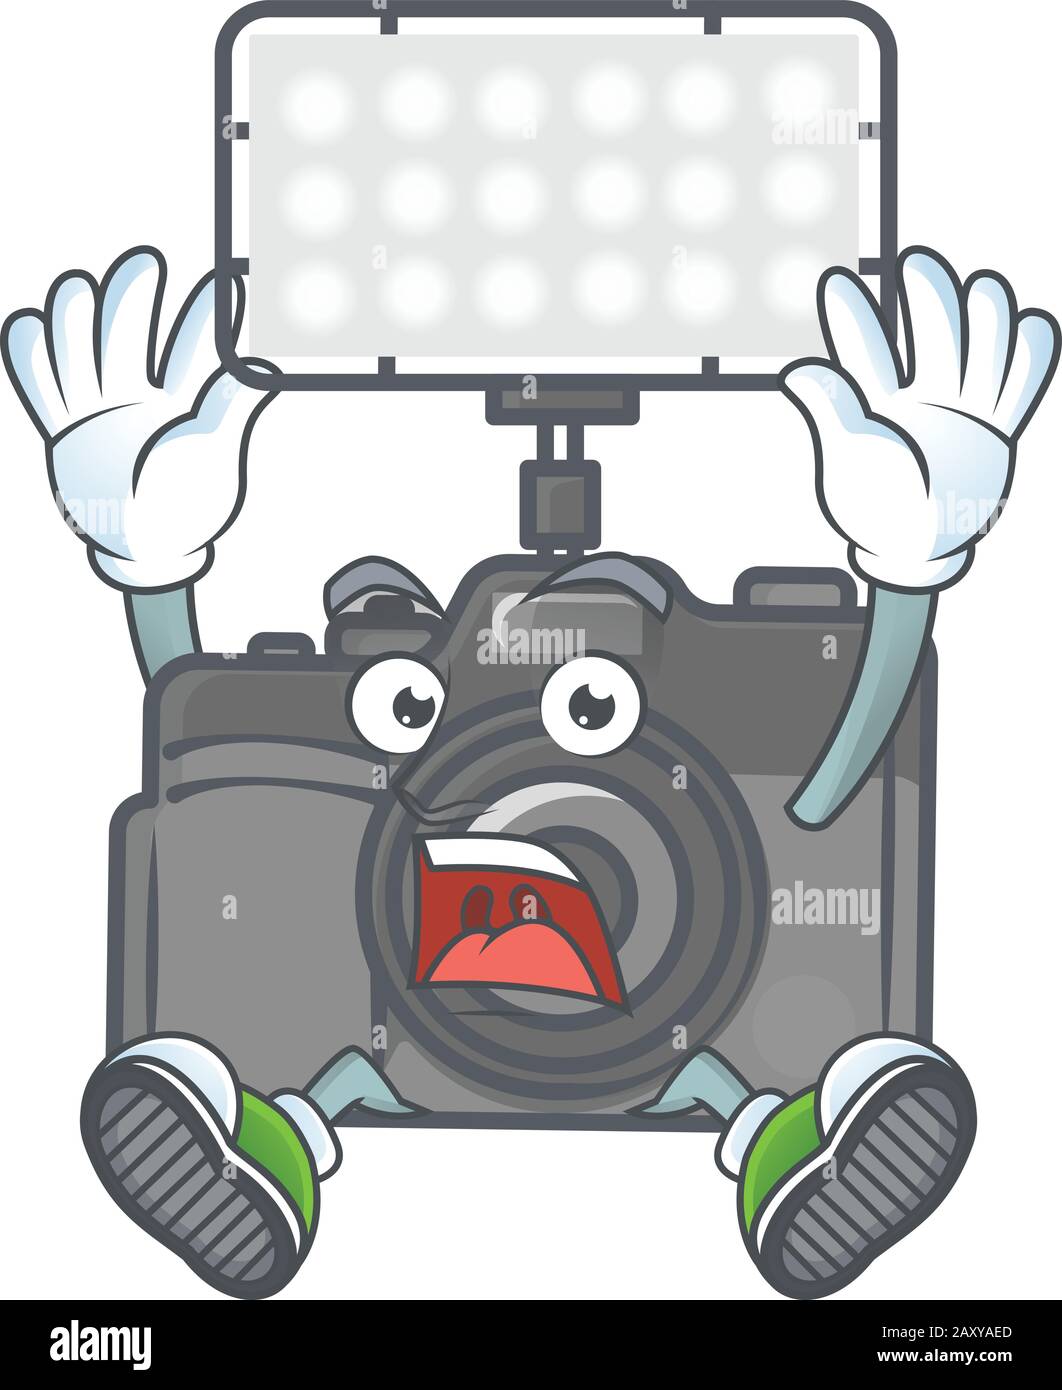 A picture of photo camera with lighting cartoon design with